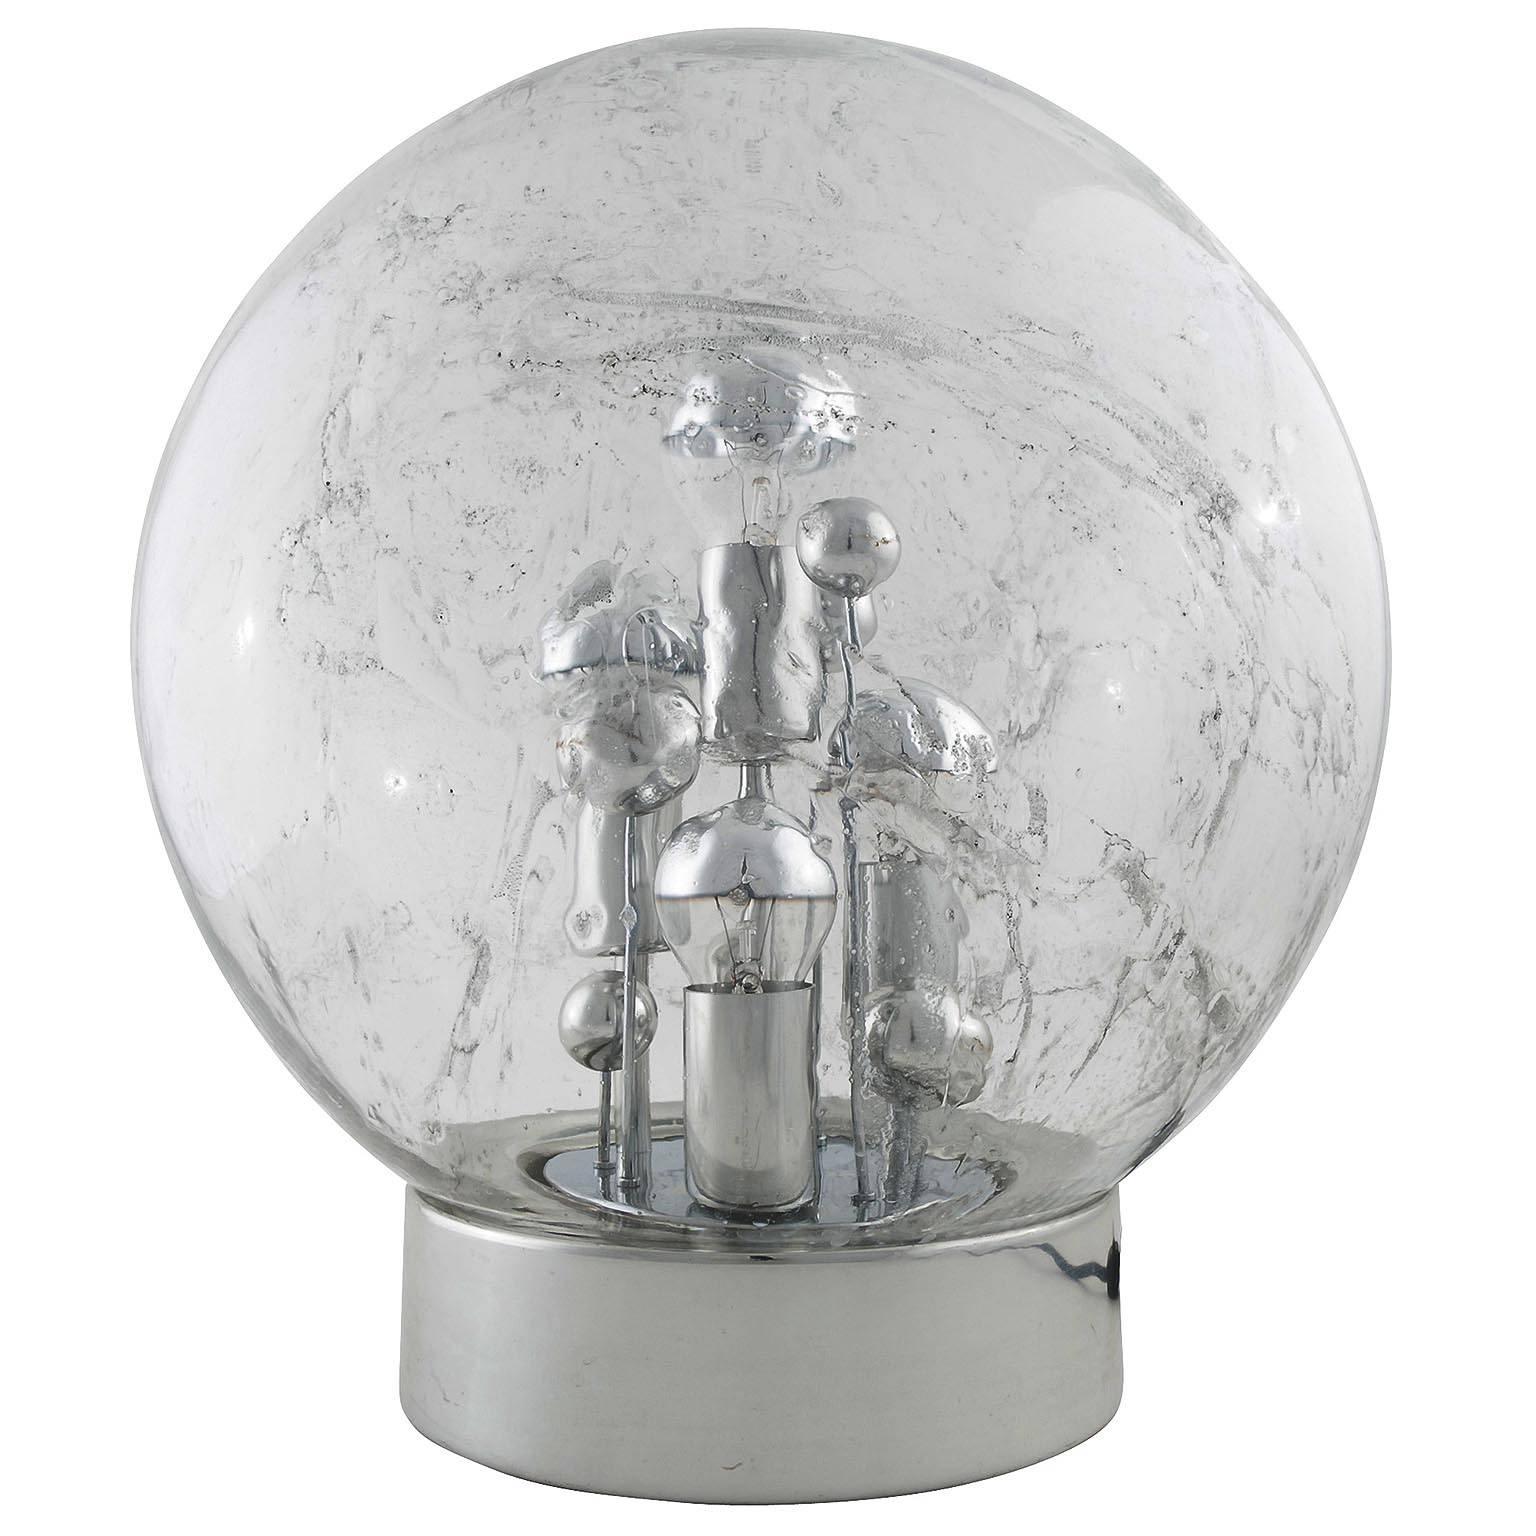 A table or floor lamp by Doria Leuchten Germany from the 1970s. A large smoked glass globe with many air bubble inclusions and a chromed base.
The light has four sockets of medium base bulbs (60W max. per bulb). Works well with mirrored half chrome